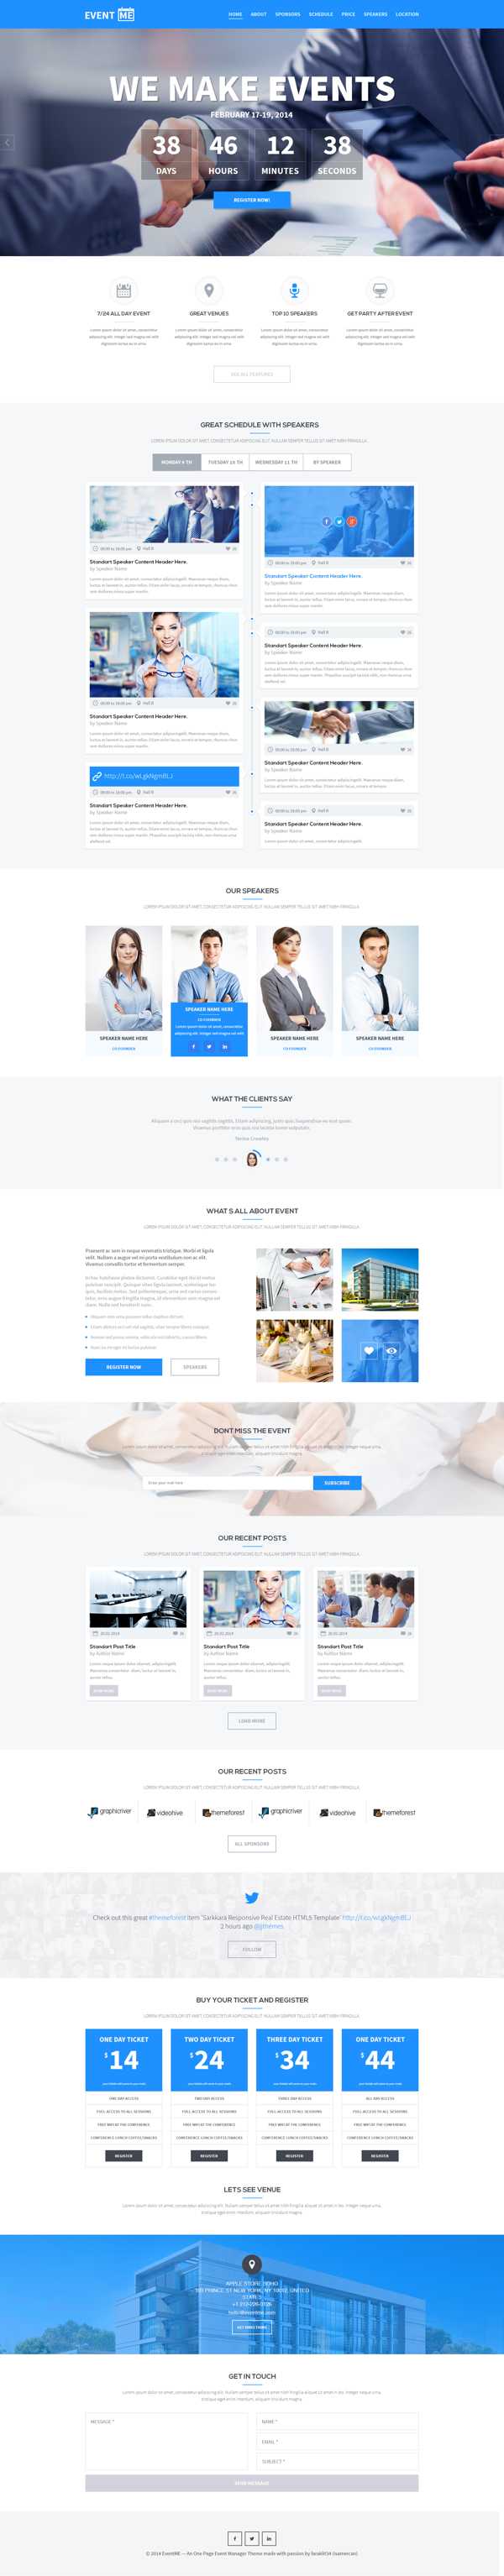 Psd Templates: 20 One Page Free Web Templates | Freebies With Regard To Single Page Brochure Templates Psd